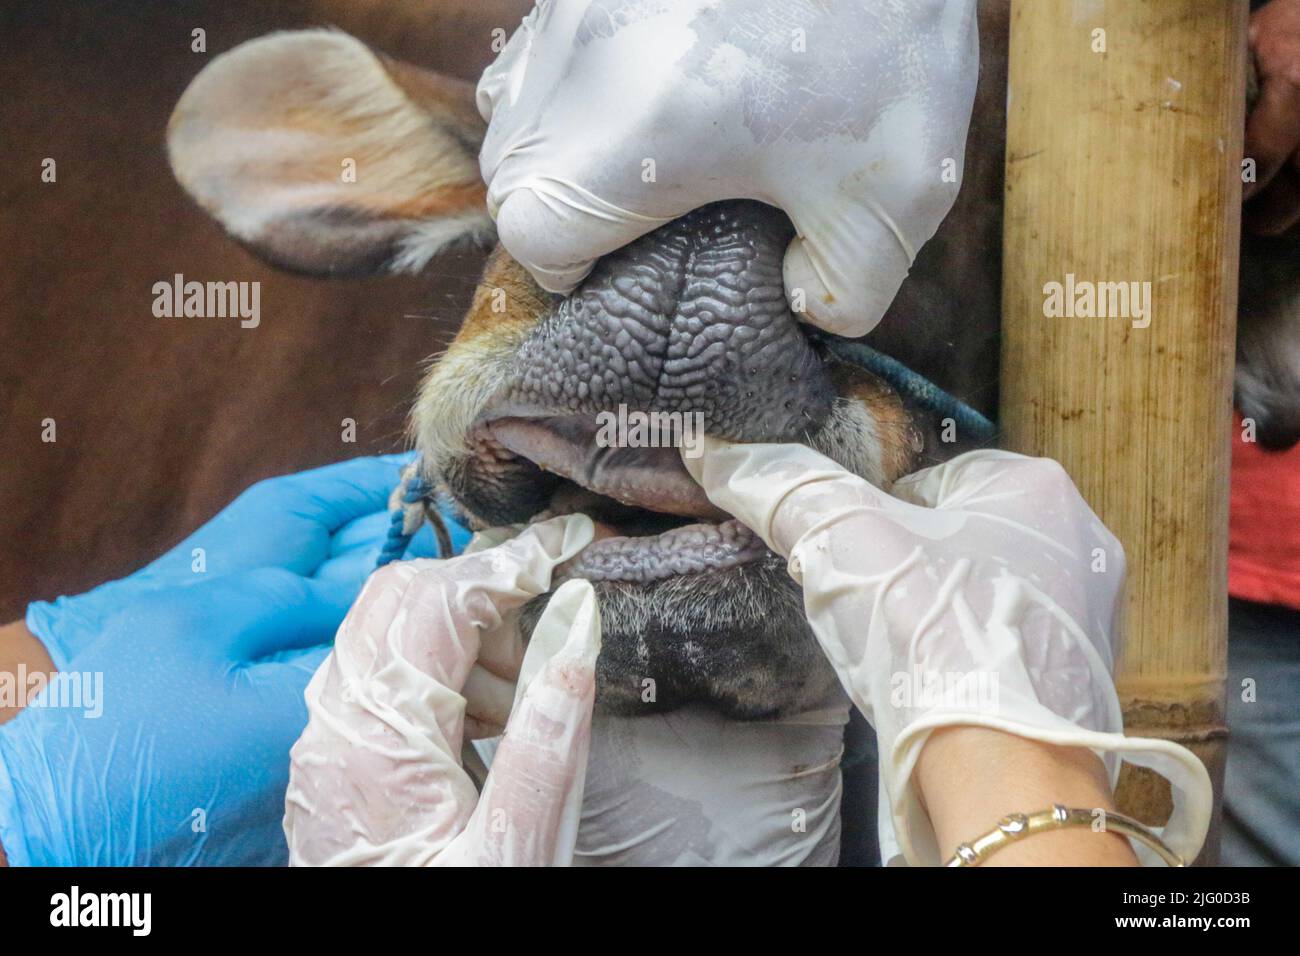 veterinarians check the health of cows for the prevention of foot and mouth disease during the Eid al-Adha celebration, in Indonesia on July 6, 2022 Stock Photo